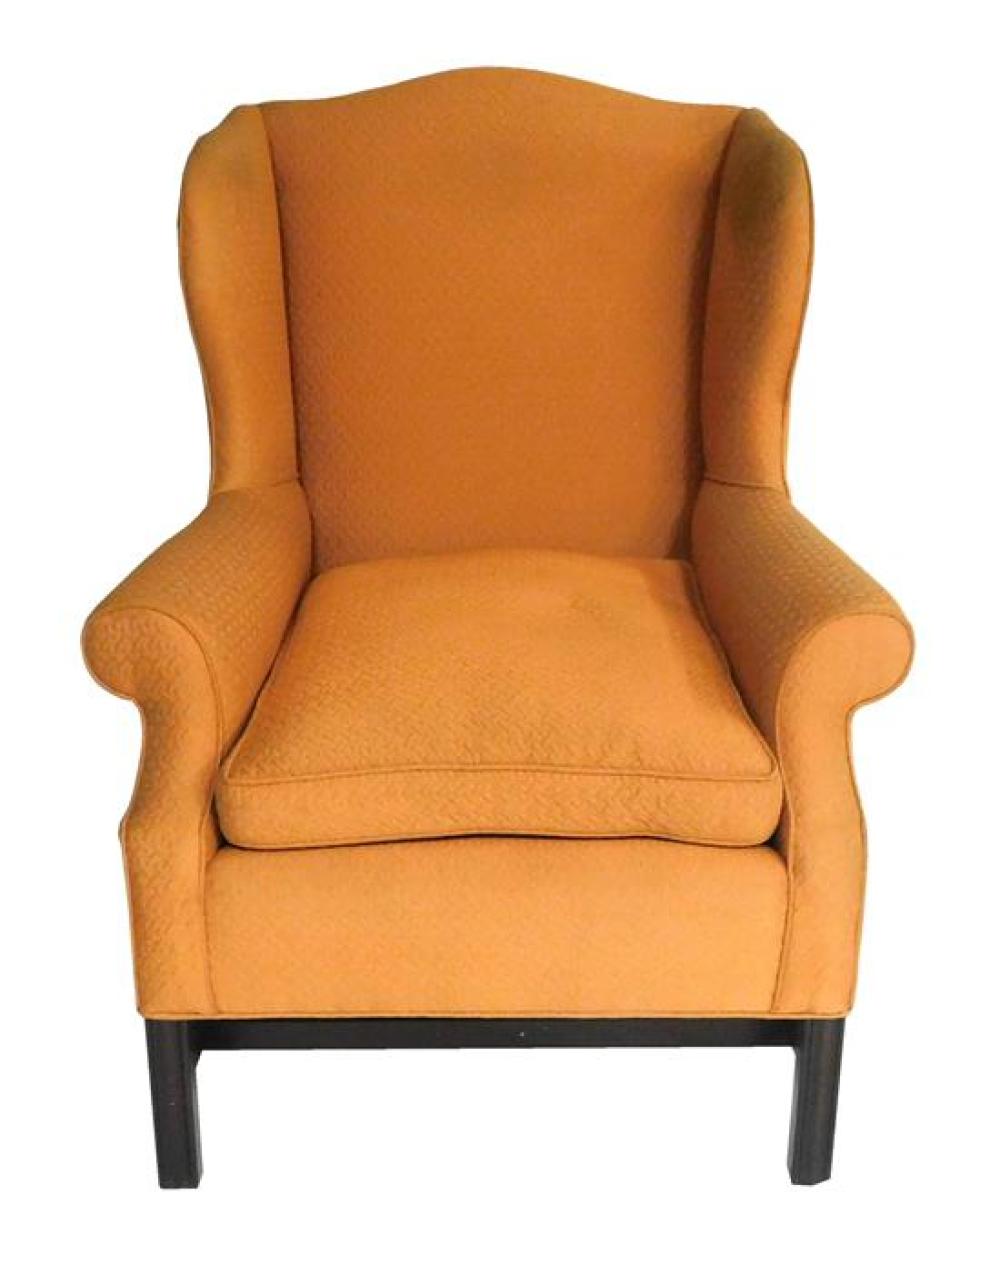 PERSIMMON COLORED UPHOLSTERED WINGBACK 31cf3a